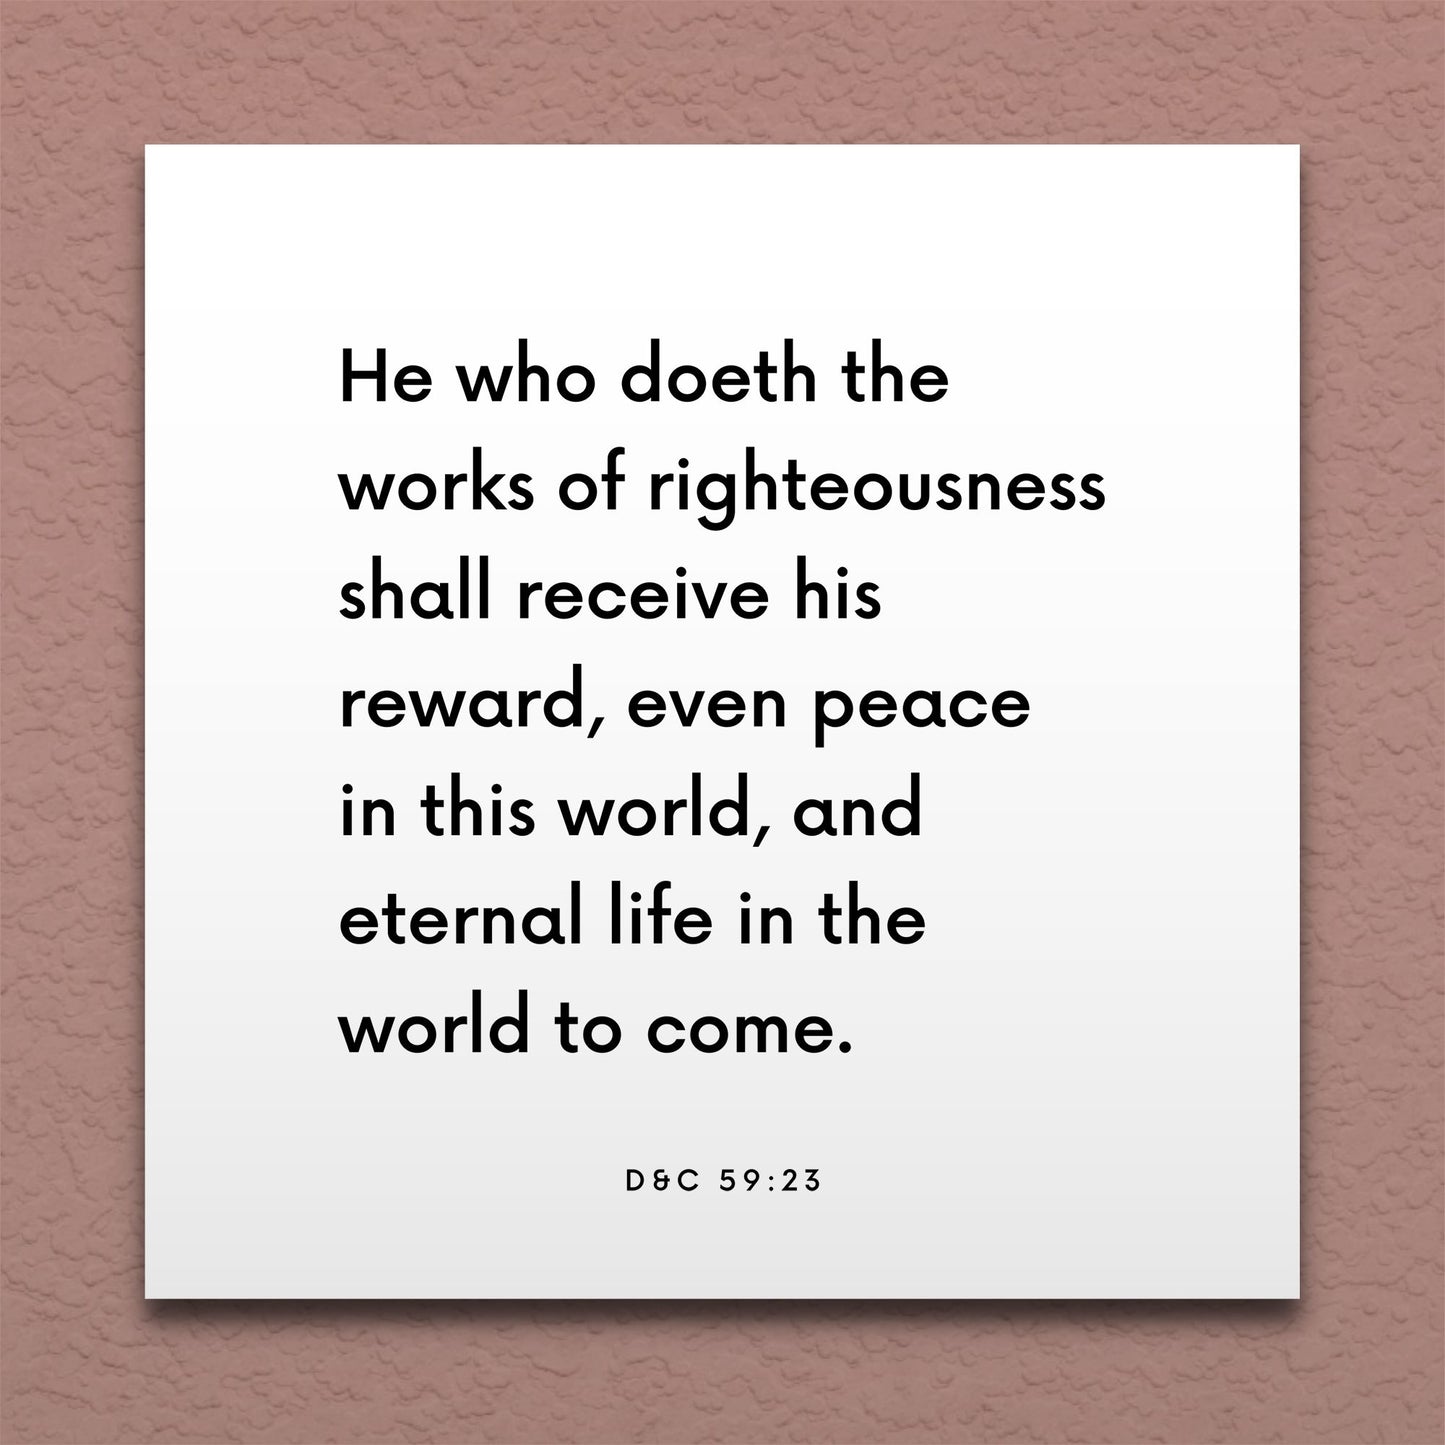 Wall-mounted scripture tile for D&C 59:23 - "He who doeth the works of righteousness"